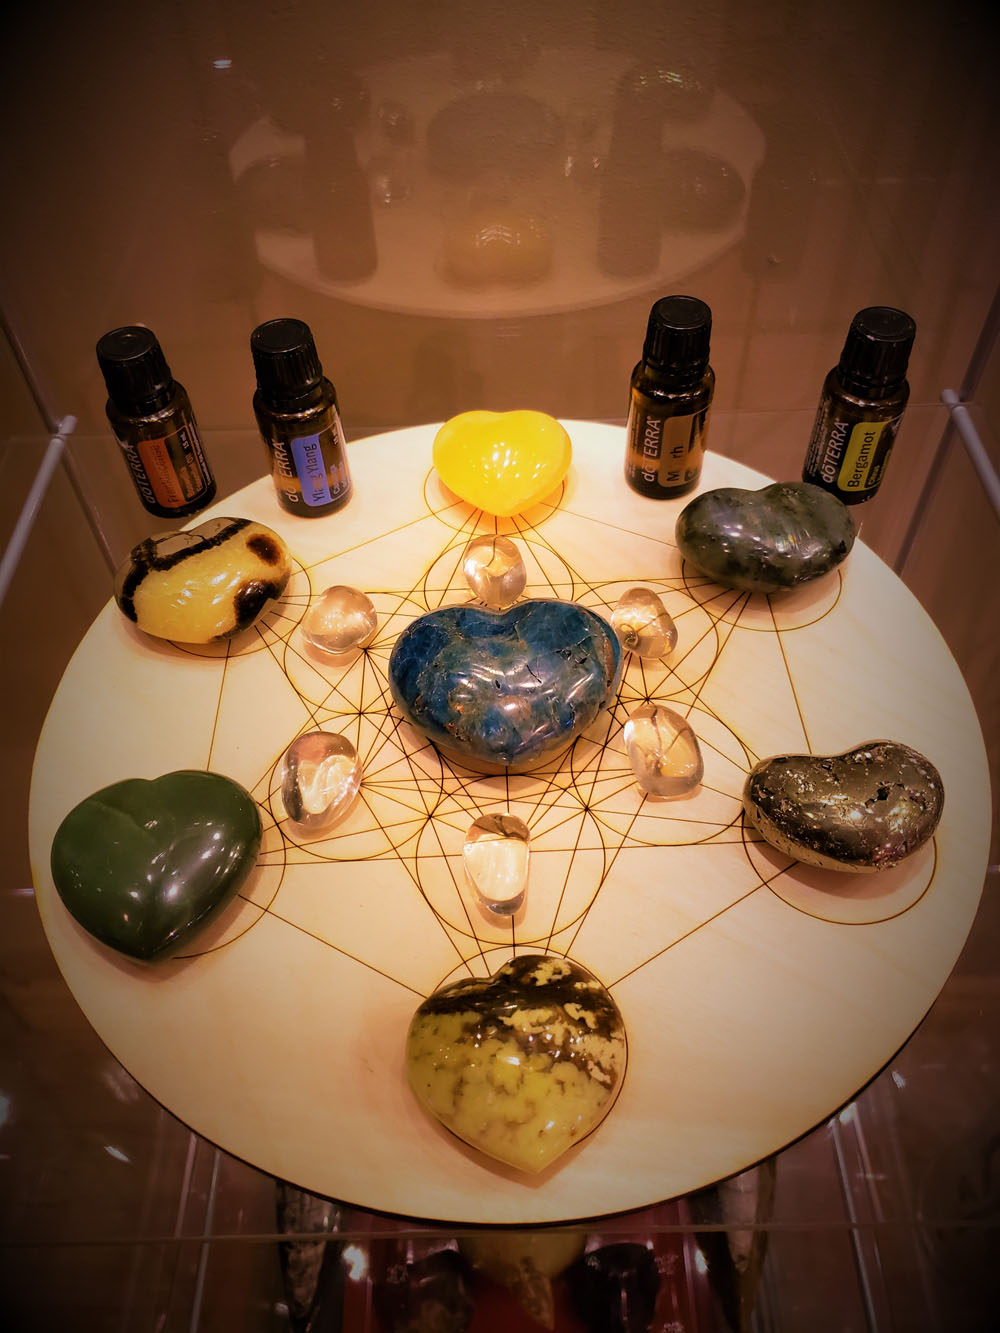 Esseintial oils and crystals on a round table-wellness retreat